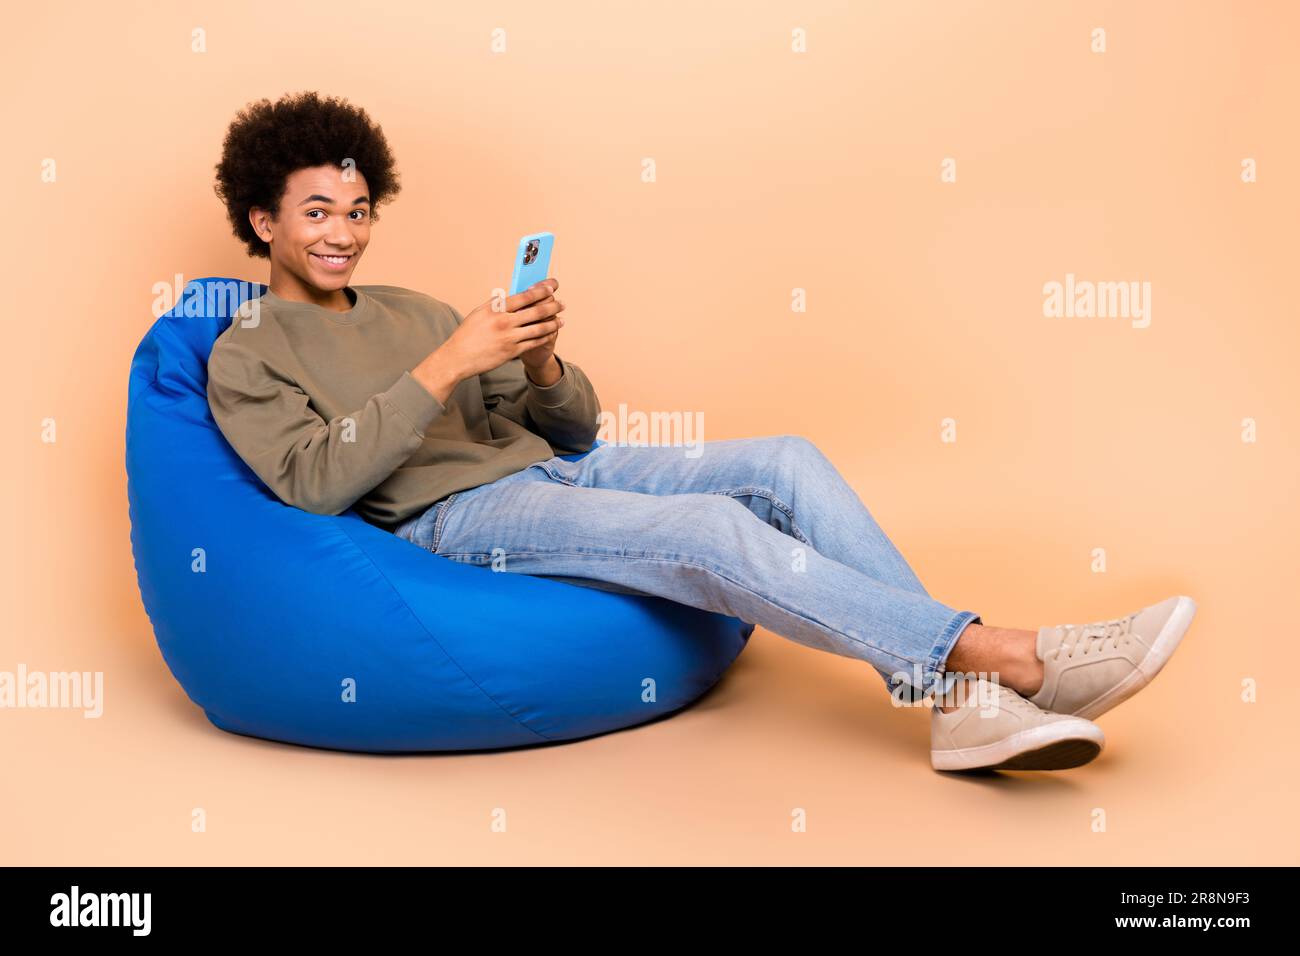 https://c8.alamy.com/comp/2R8N9F3/full-body-photo-of-youngster-chilling-guy-browsing-instagram-reels-sit-bean-bag-comfort-bean-bag-pause-time-isolated-on-beige-color-background-2R8N9F3.jpg